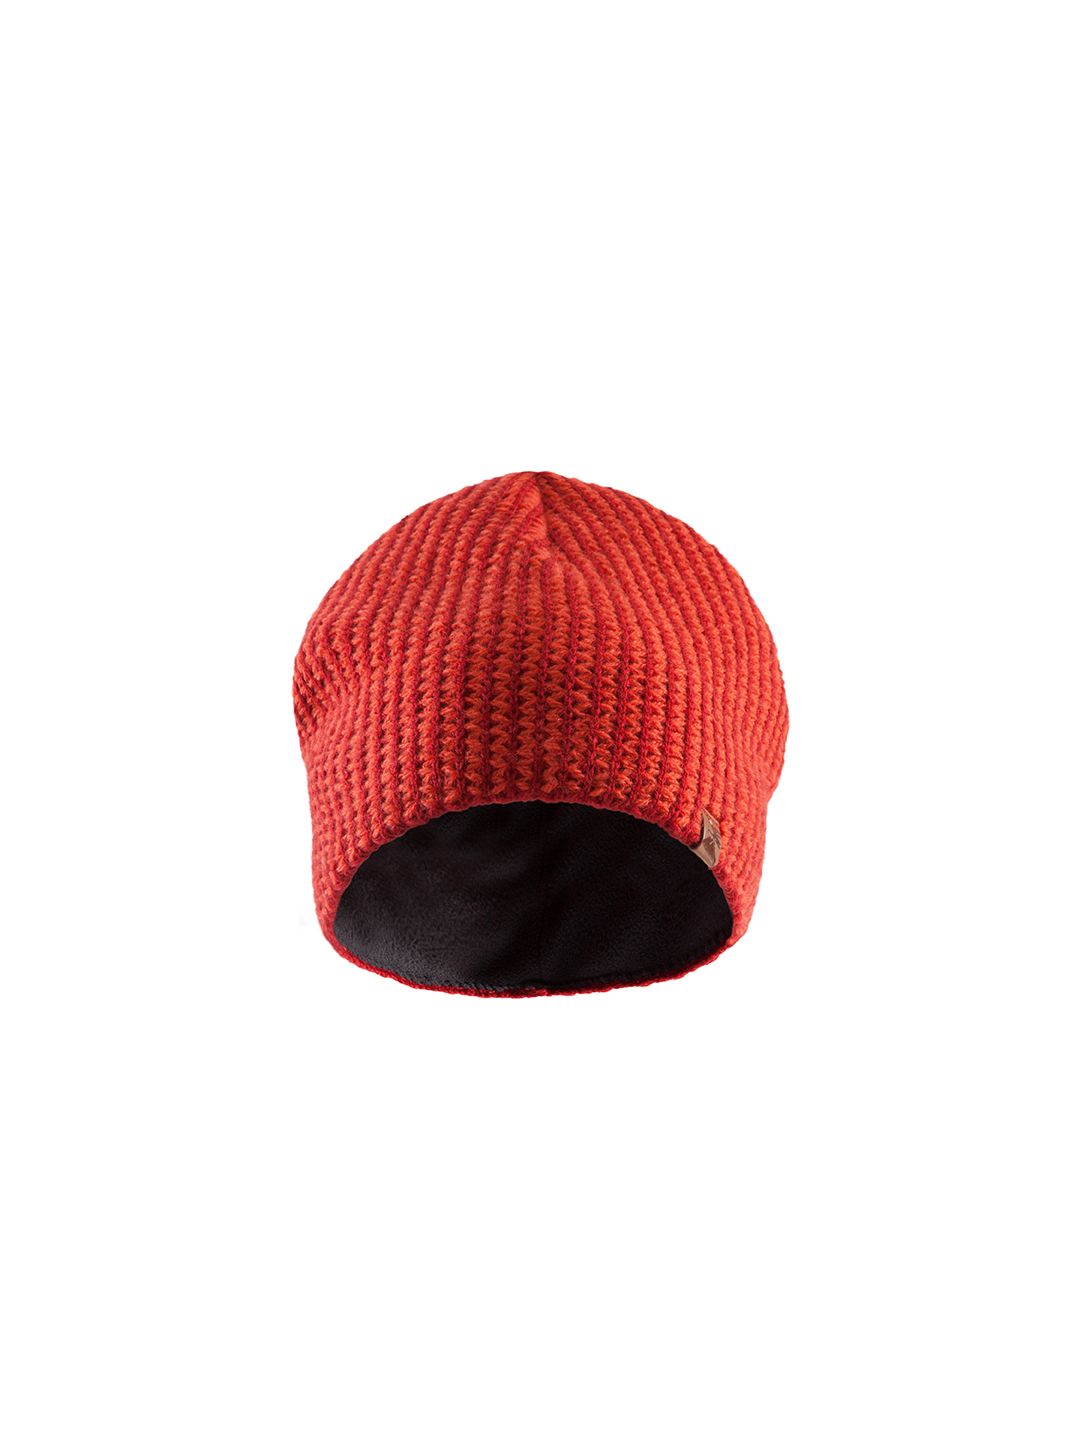 Simond By Decathlon Unisex Red Beanie Price in India